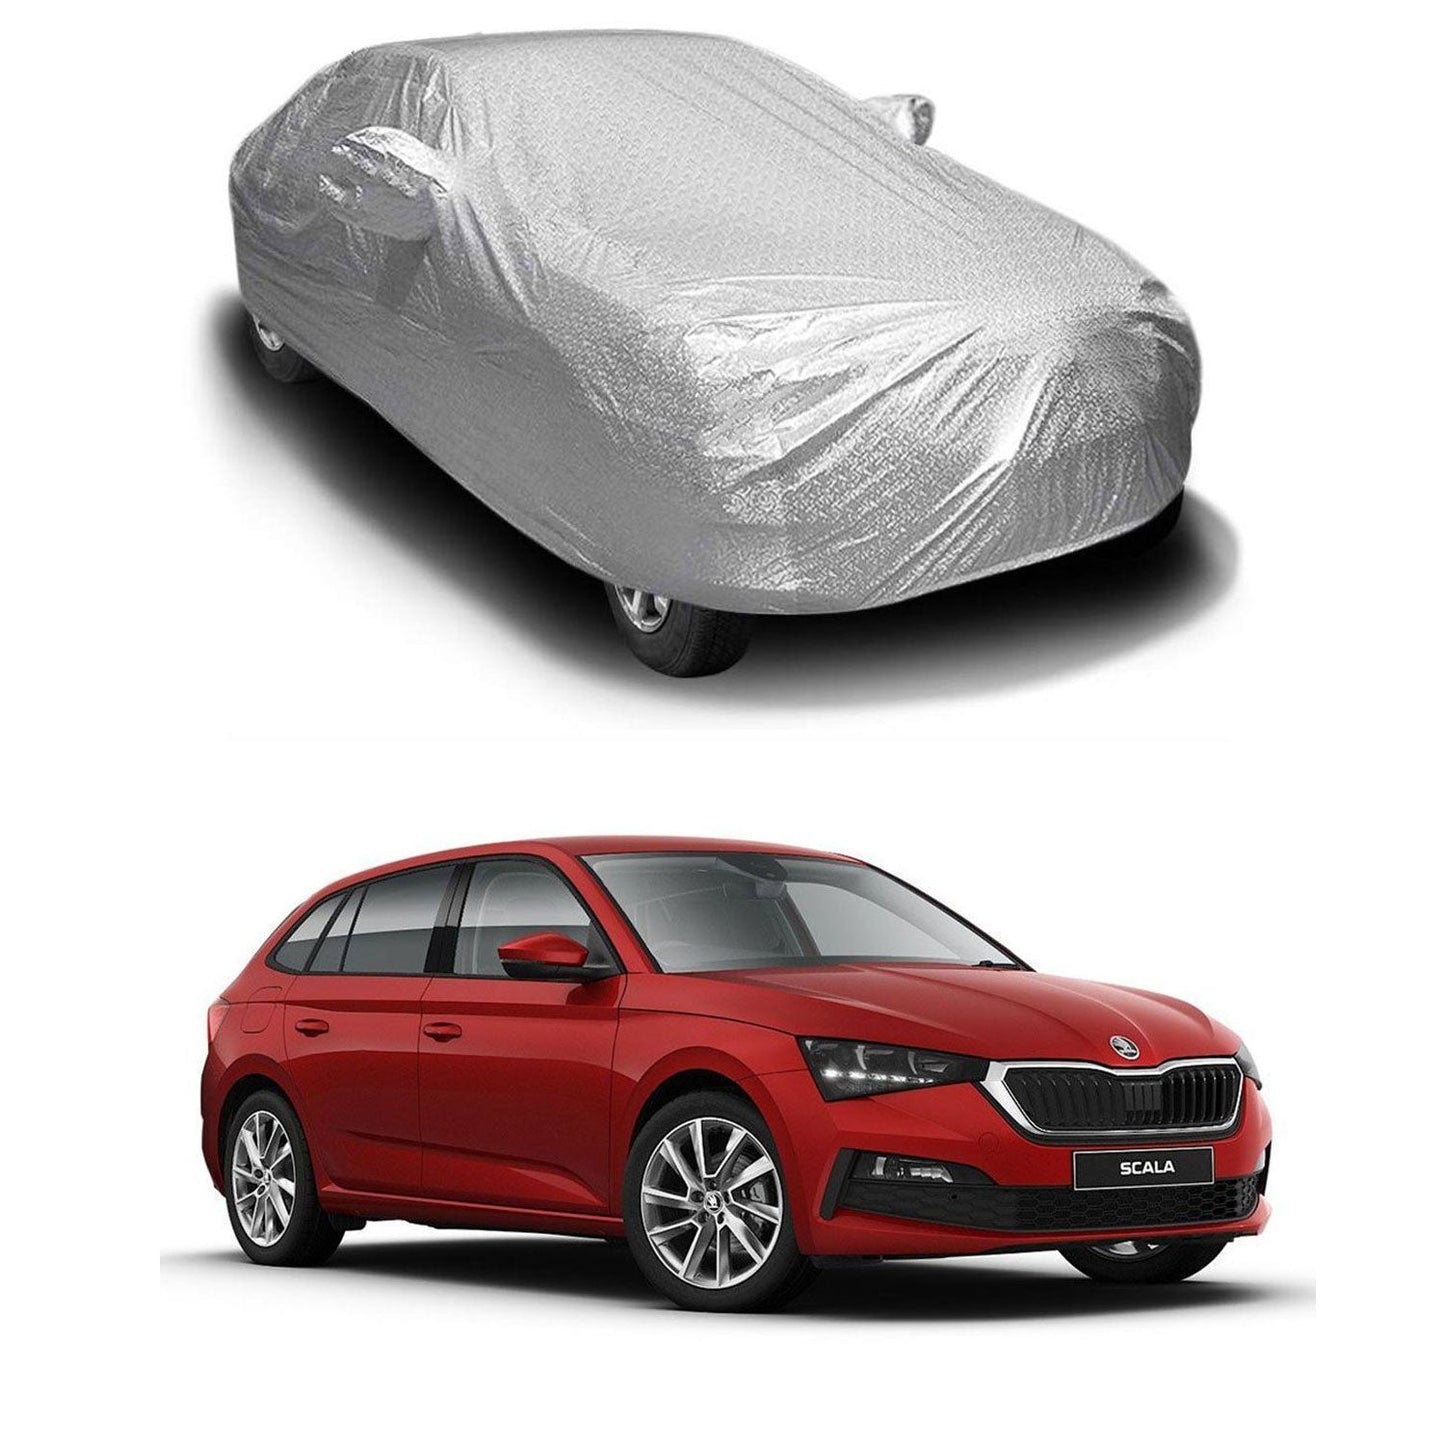 Oshotto Spyro Silver Anti Reflective, dustproof and Water Proof Car Body Cover with Mirror Pockets For Renault Scala/Fluence